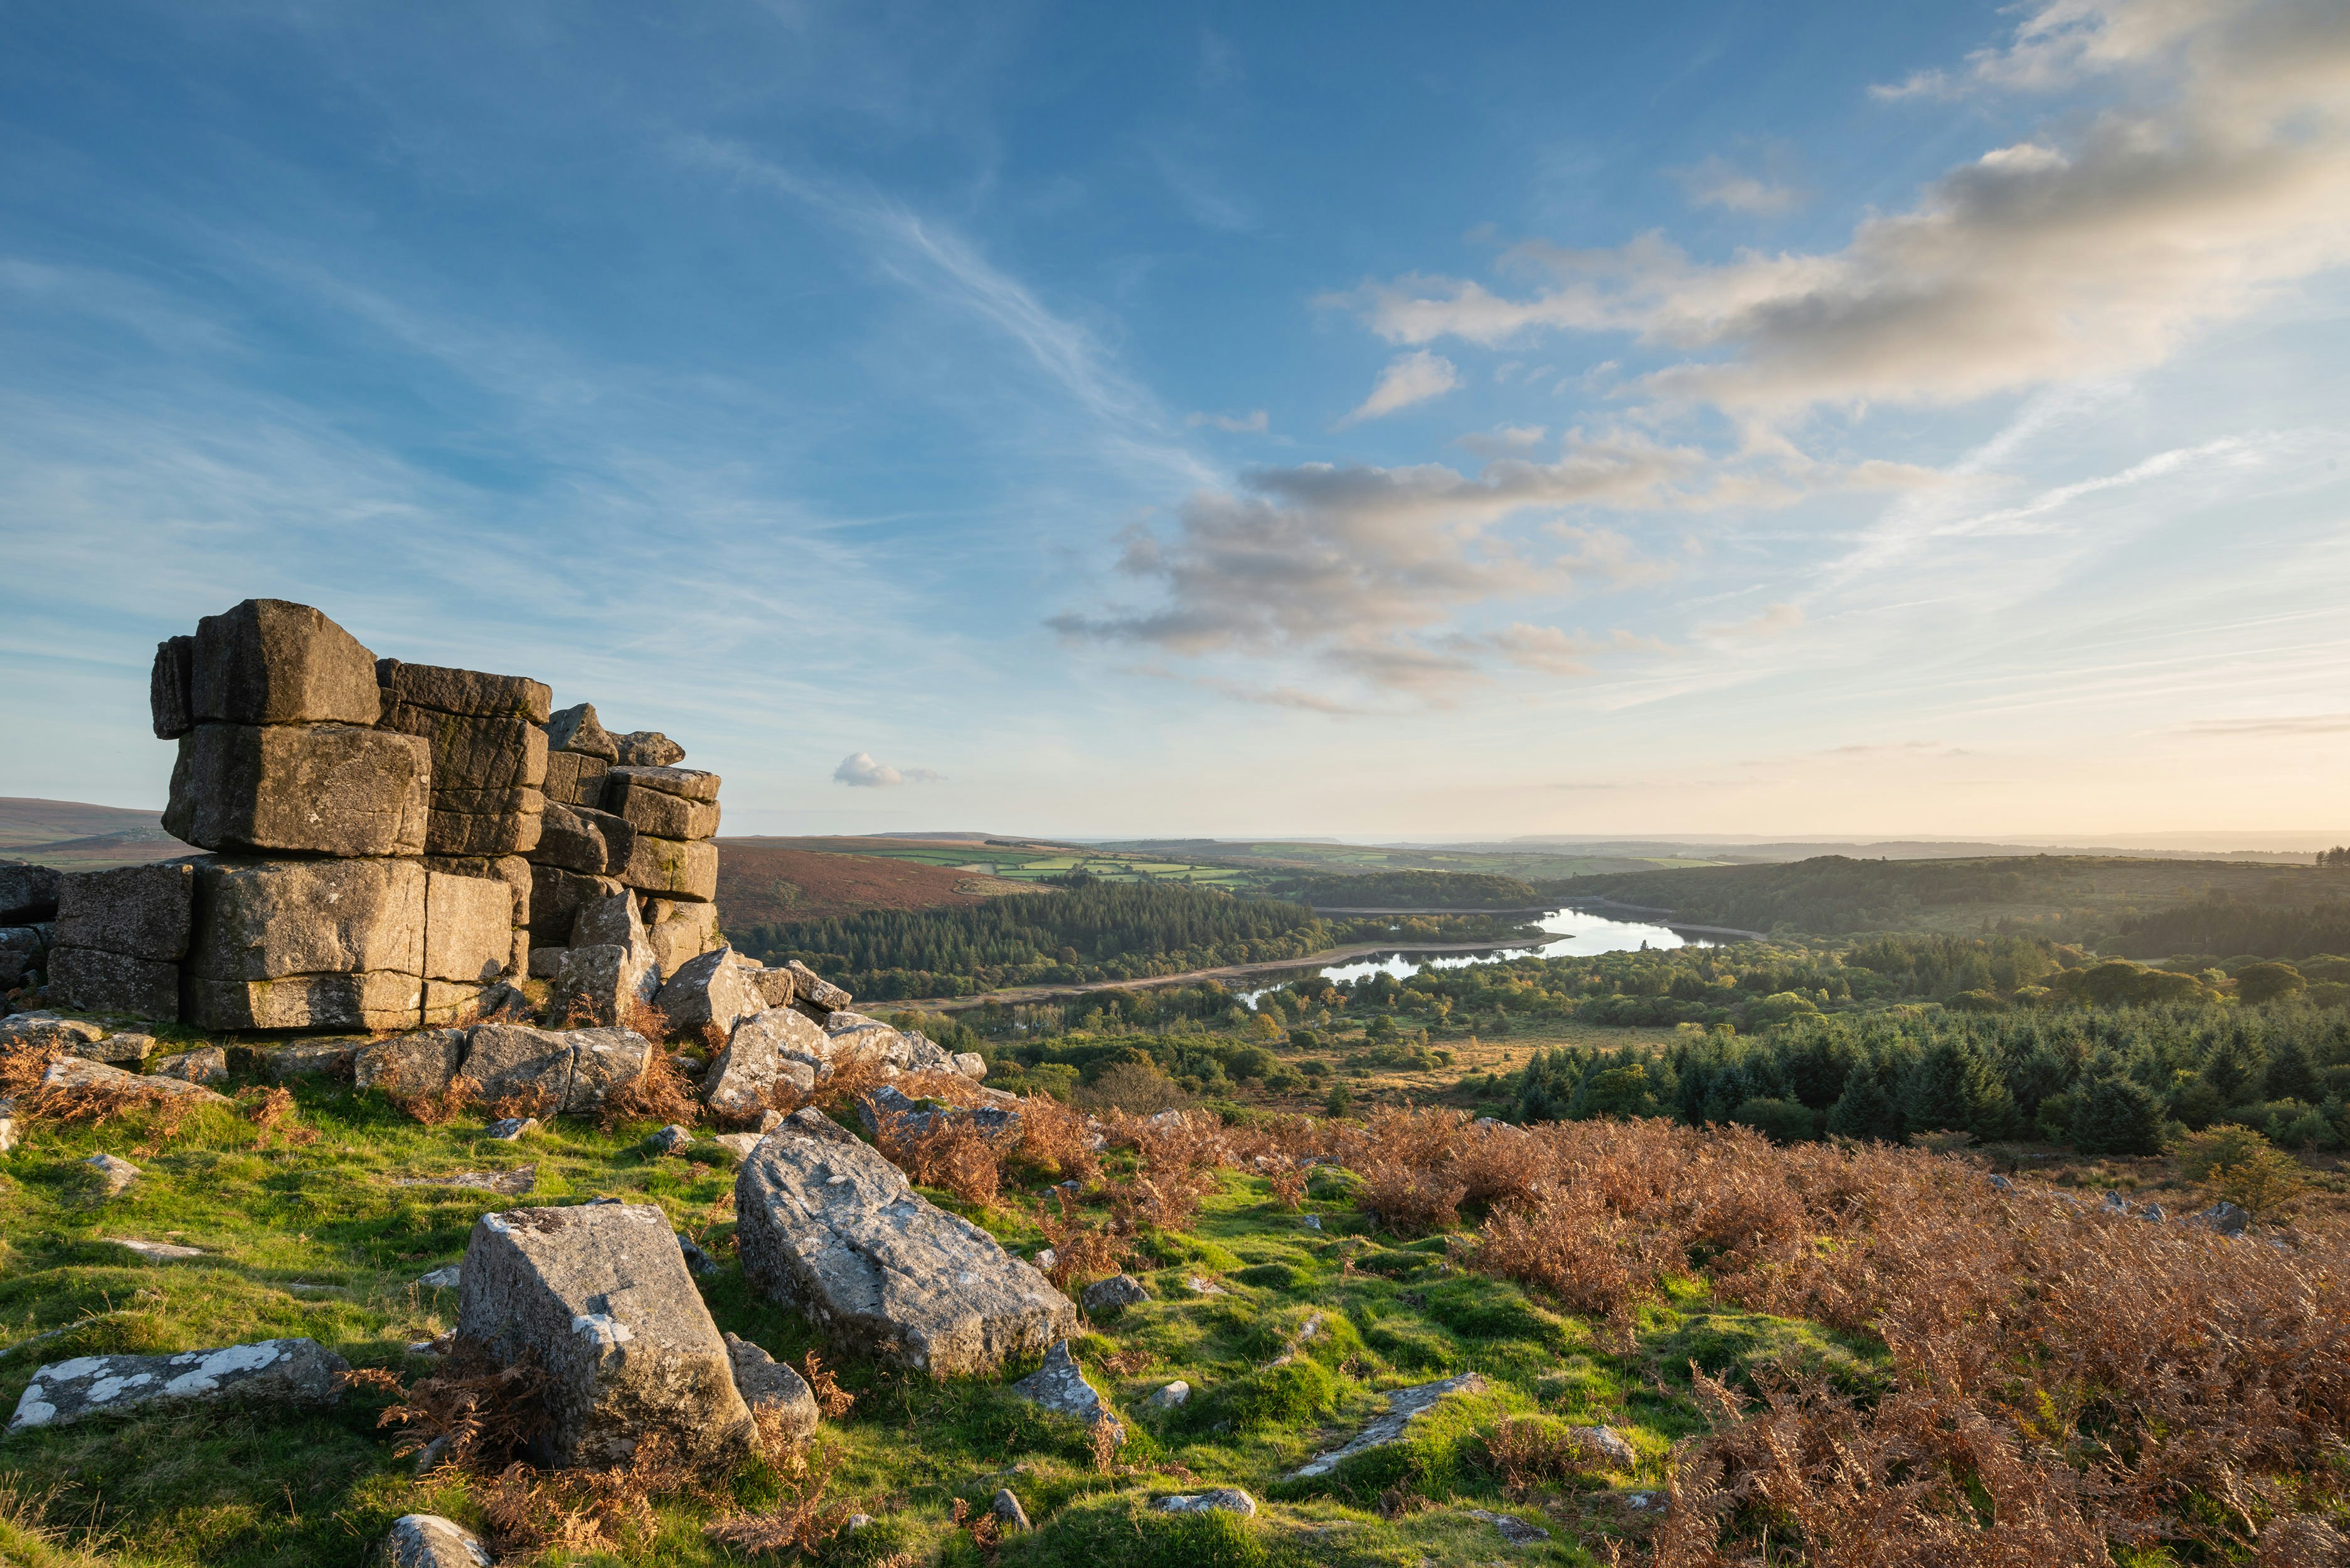 A scenic view of Dartmoor National Park in England. The park is filled with forests and has a river running through it.